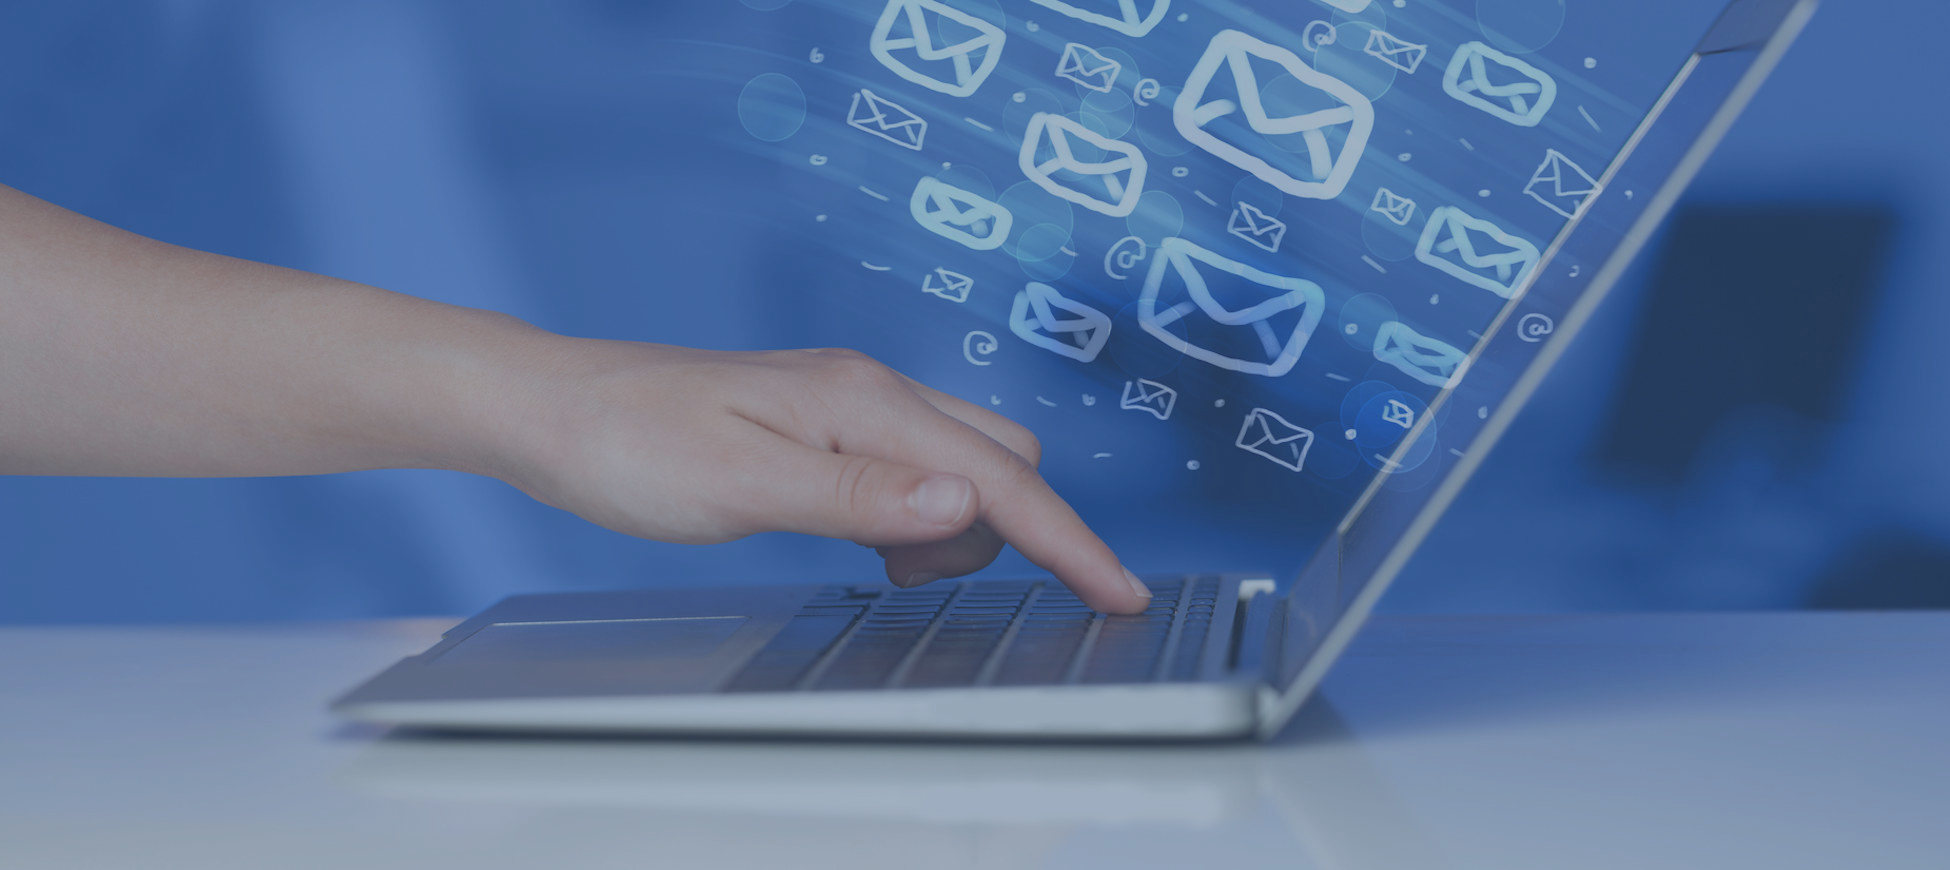 Send marketing email messages to hundreds or even thousands of recipients, then monitor who opens the emails to help you target your marketing and lead opportunities.